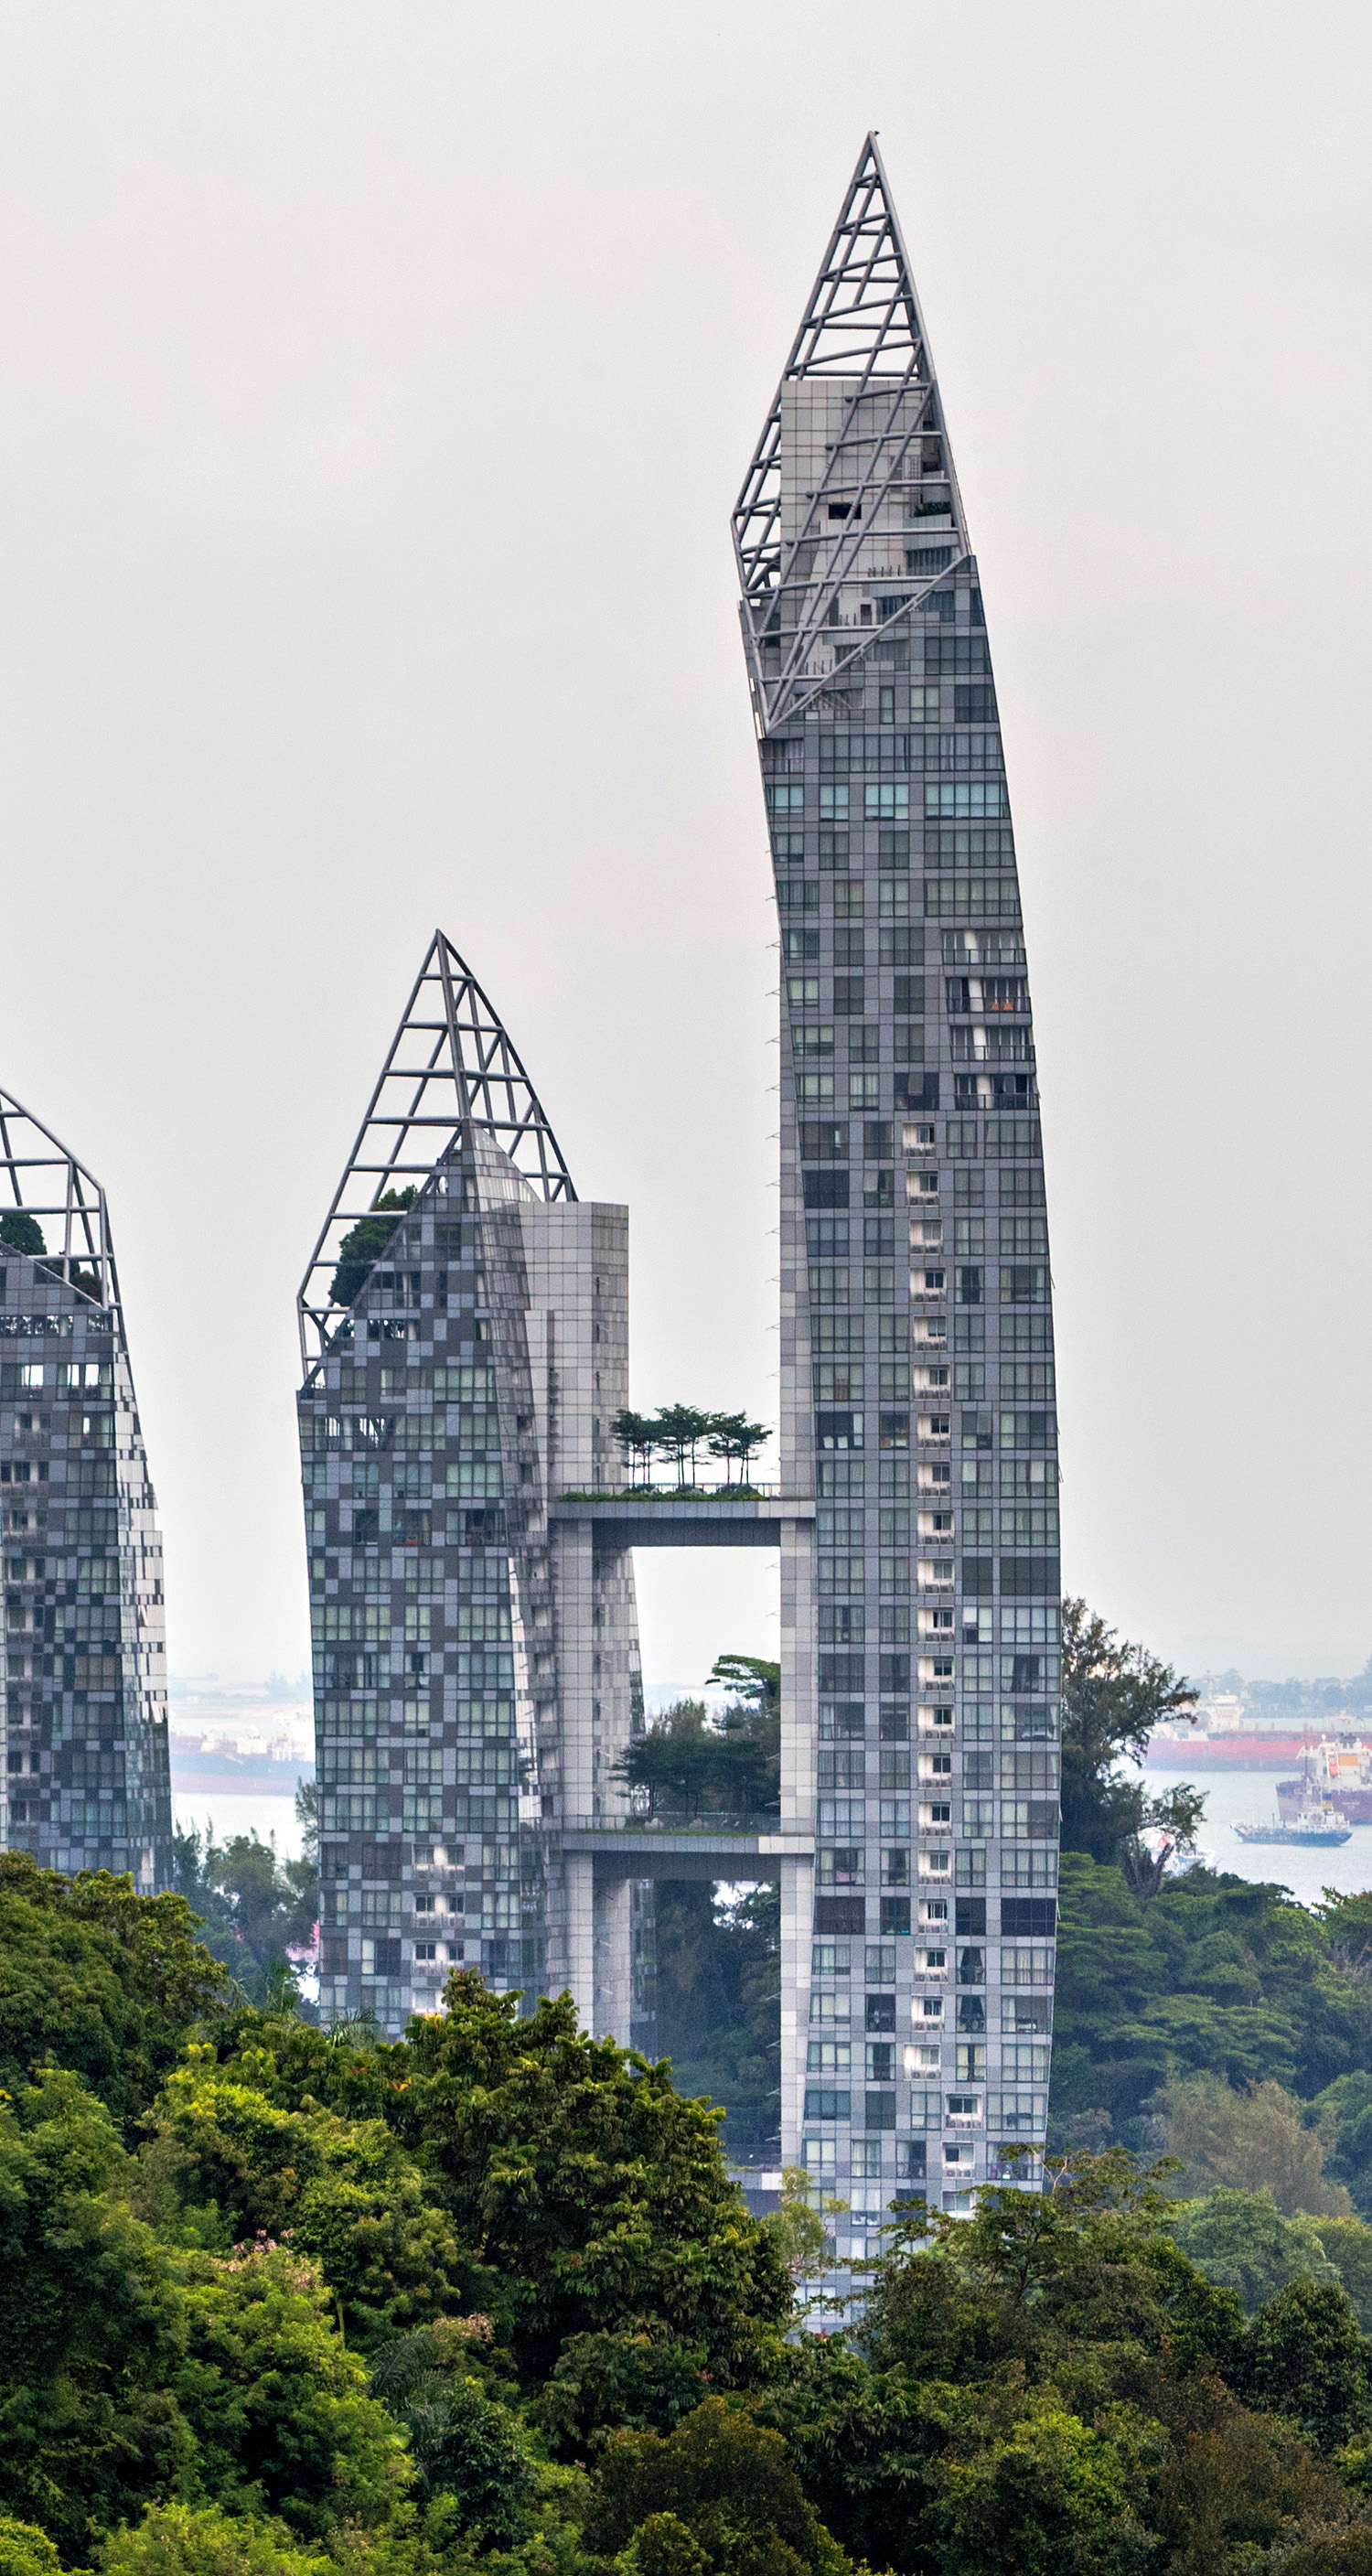 Reflections at Keppel Bay Tower 1A, Singapore - View from Henderson Waves. © Mathias Beinling